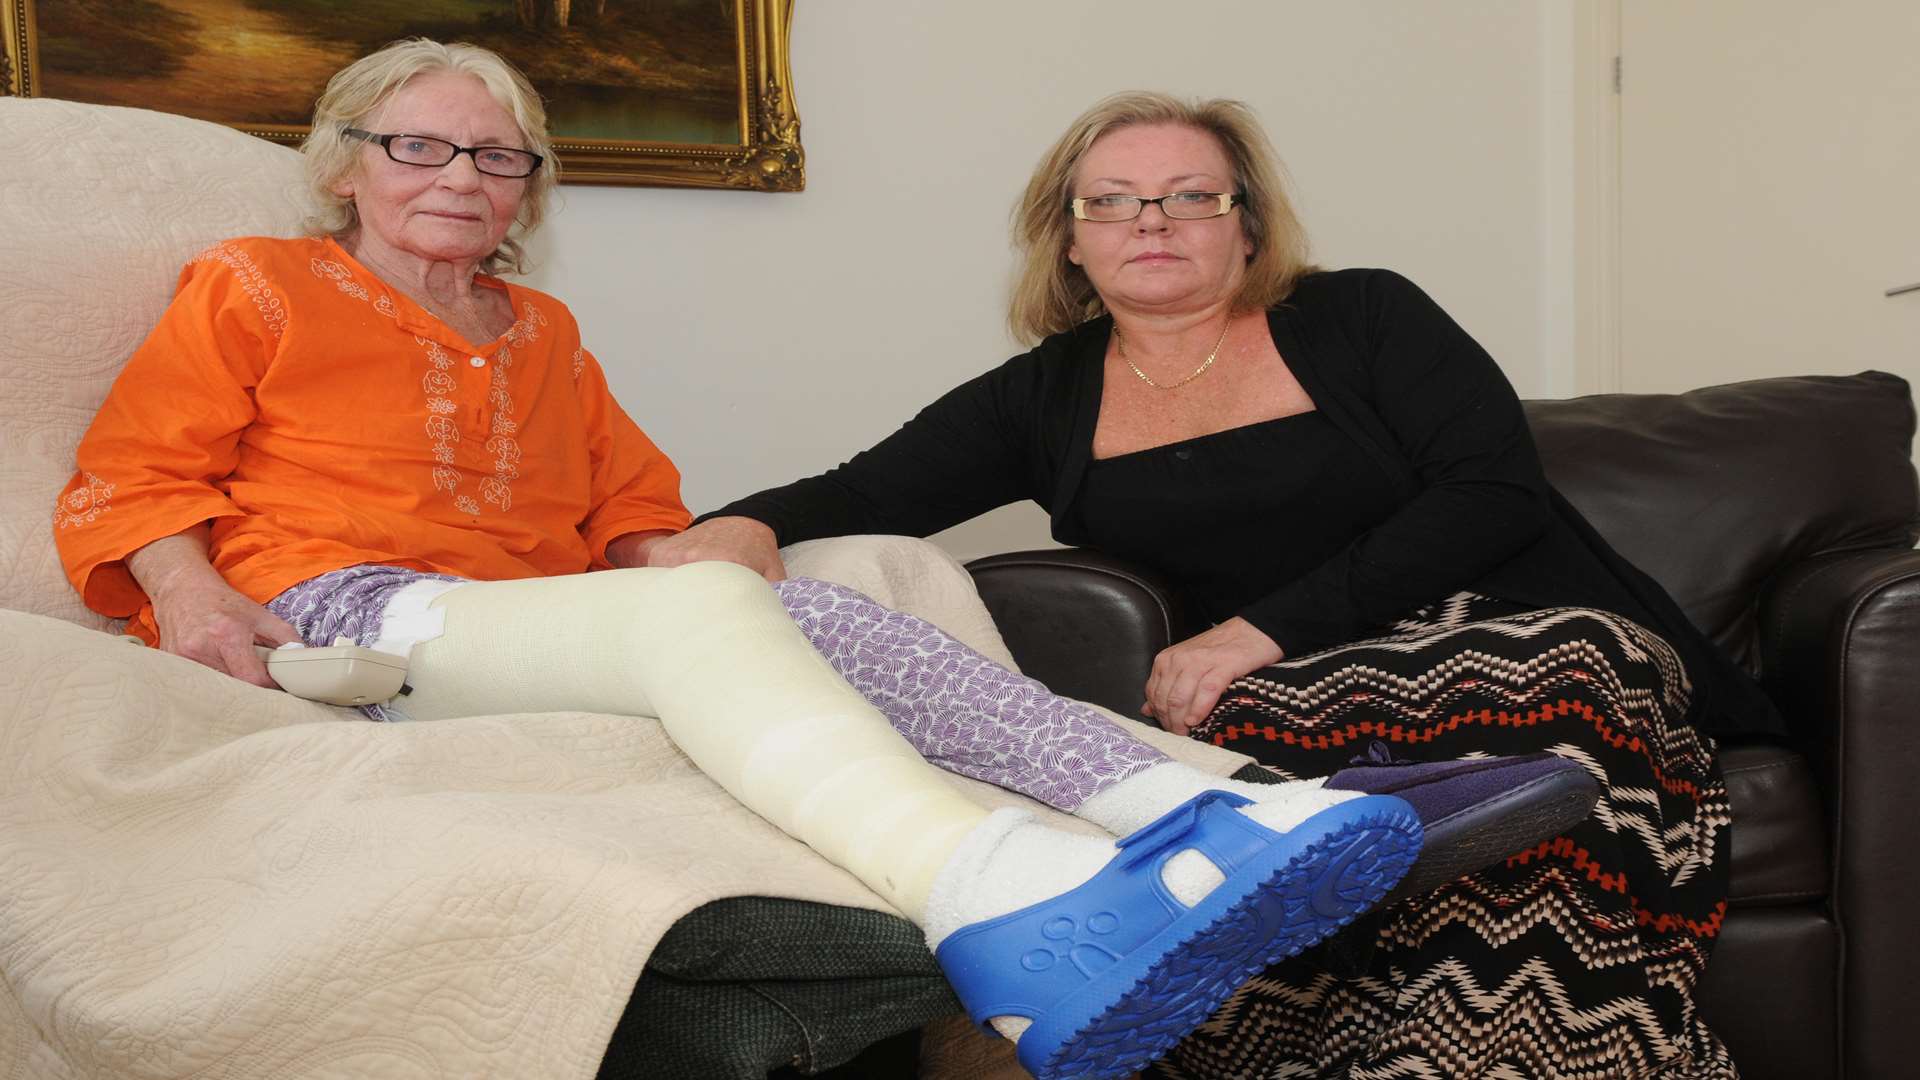 Margaret is frail and in a full leg cast yet waited hours on a hard chair to get home. Picture: Wayne McCabe